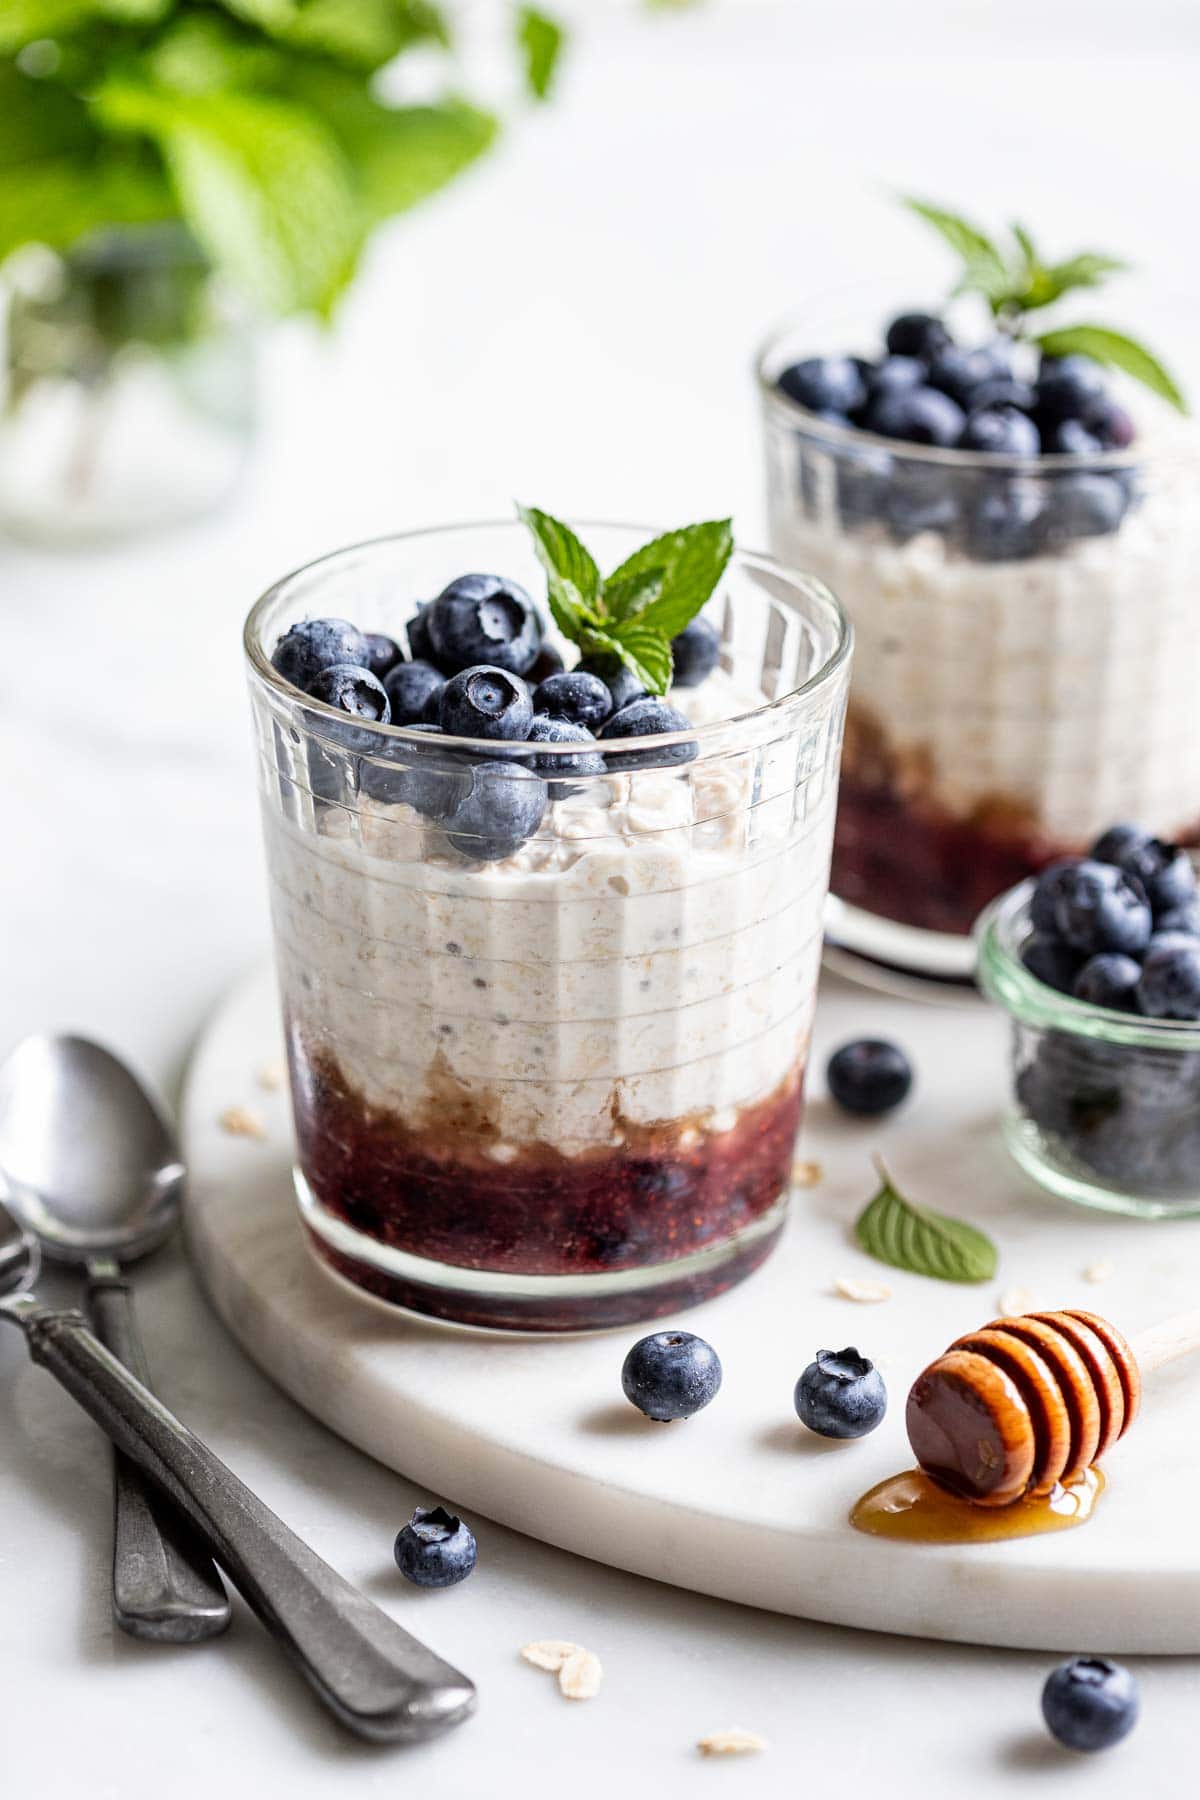 a couple of gl،es with mashed blueberries on the bottom, overnight oats layered on top, and fresh blueberries on the top. There is a clear bowl of blueberries to the right in the background, some s،s on the left, and ،ney leaking off of a ،ney s، in the foreground